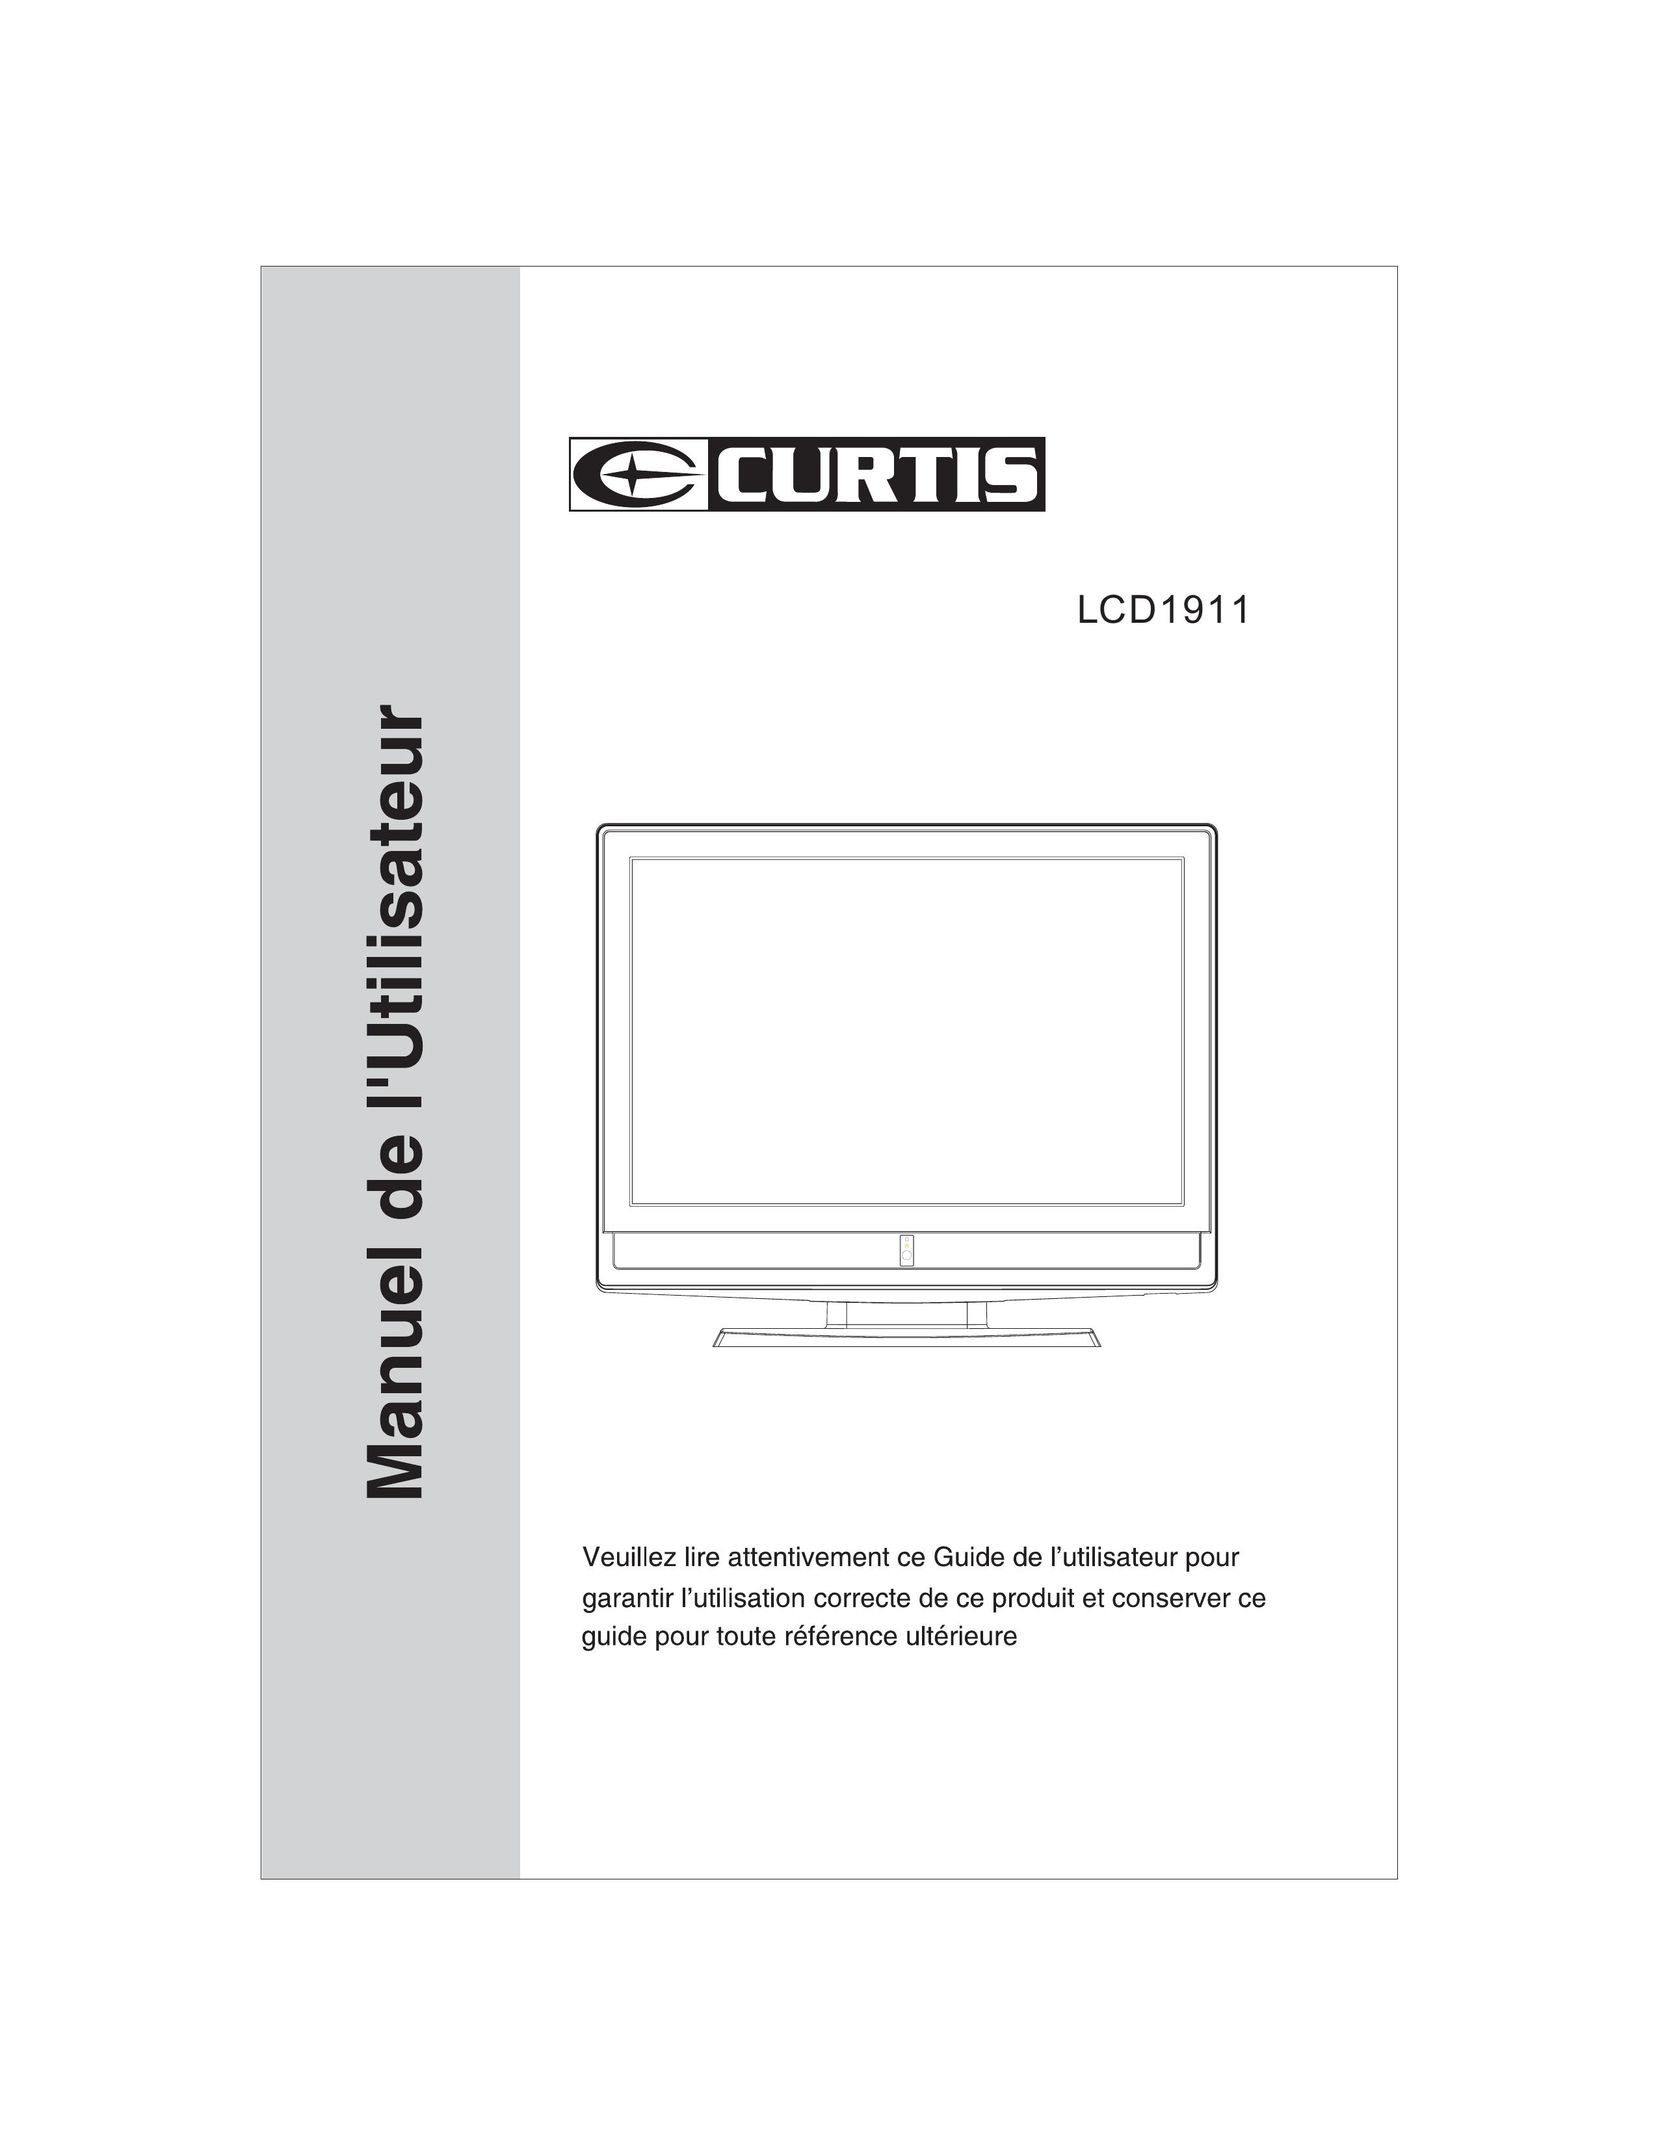 Curtis LCD1911 Flat Panel Television User Manual